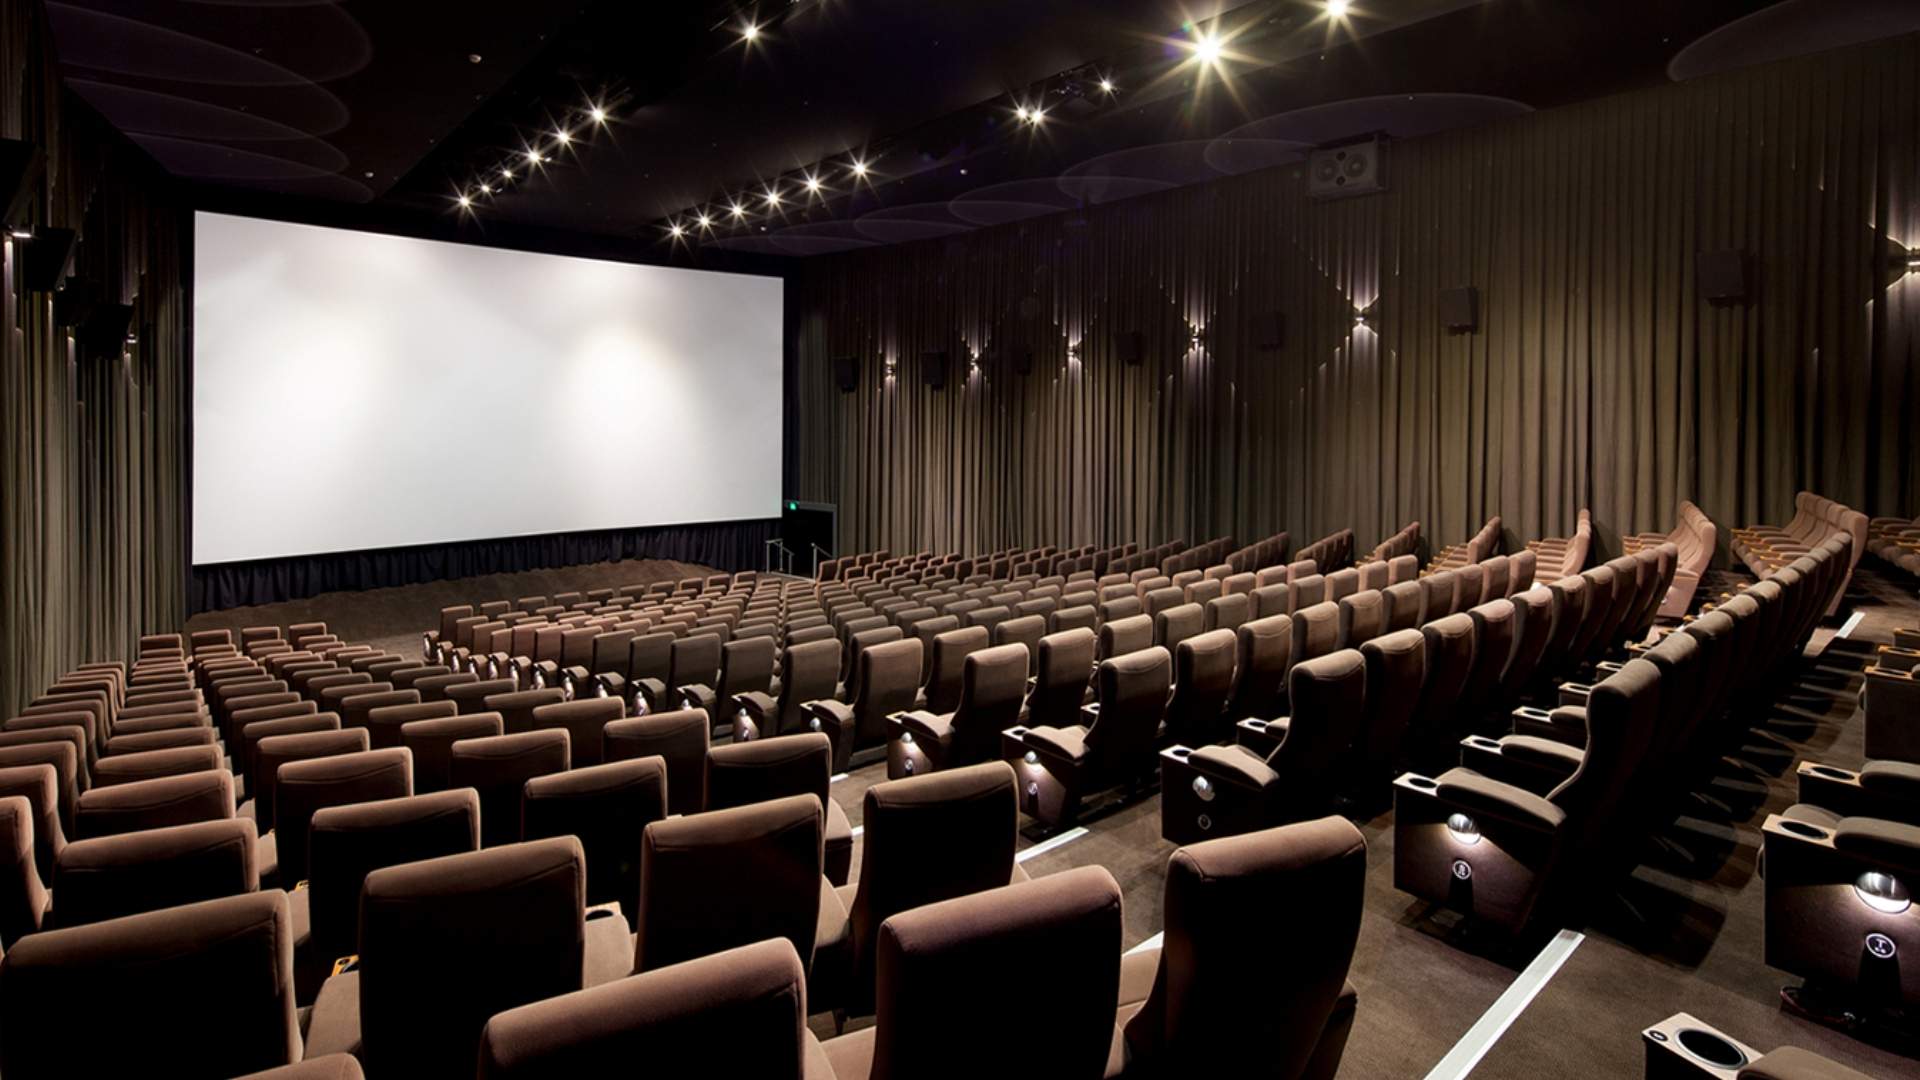 Melbourne's South East Is Getting a New Six-Screen Cinema